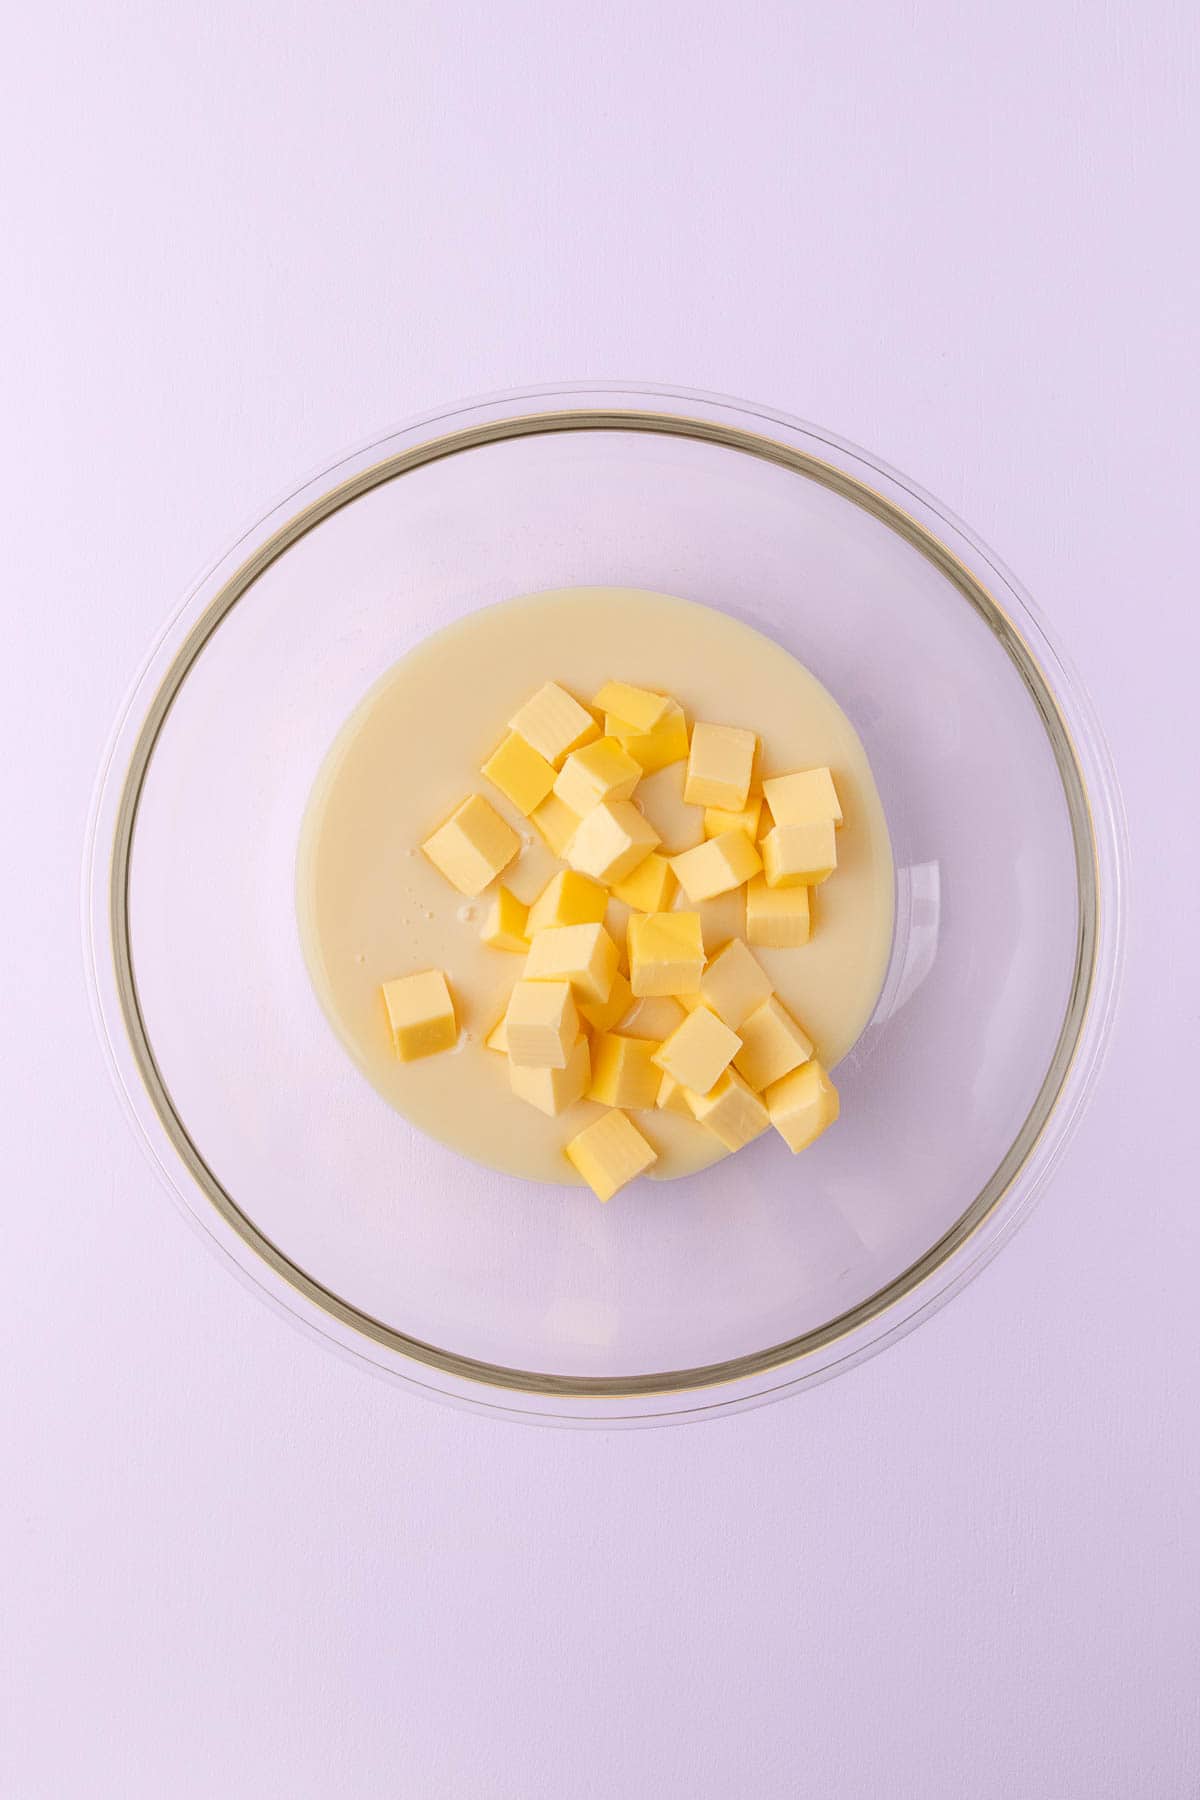 Sweetened condensed milk and chopped butter in a large glass bowl.